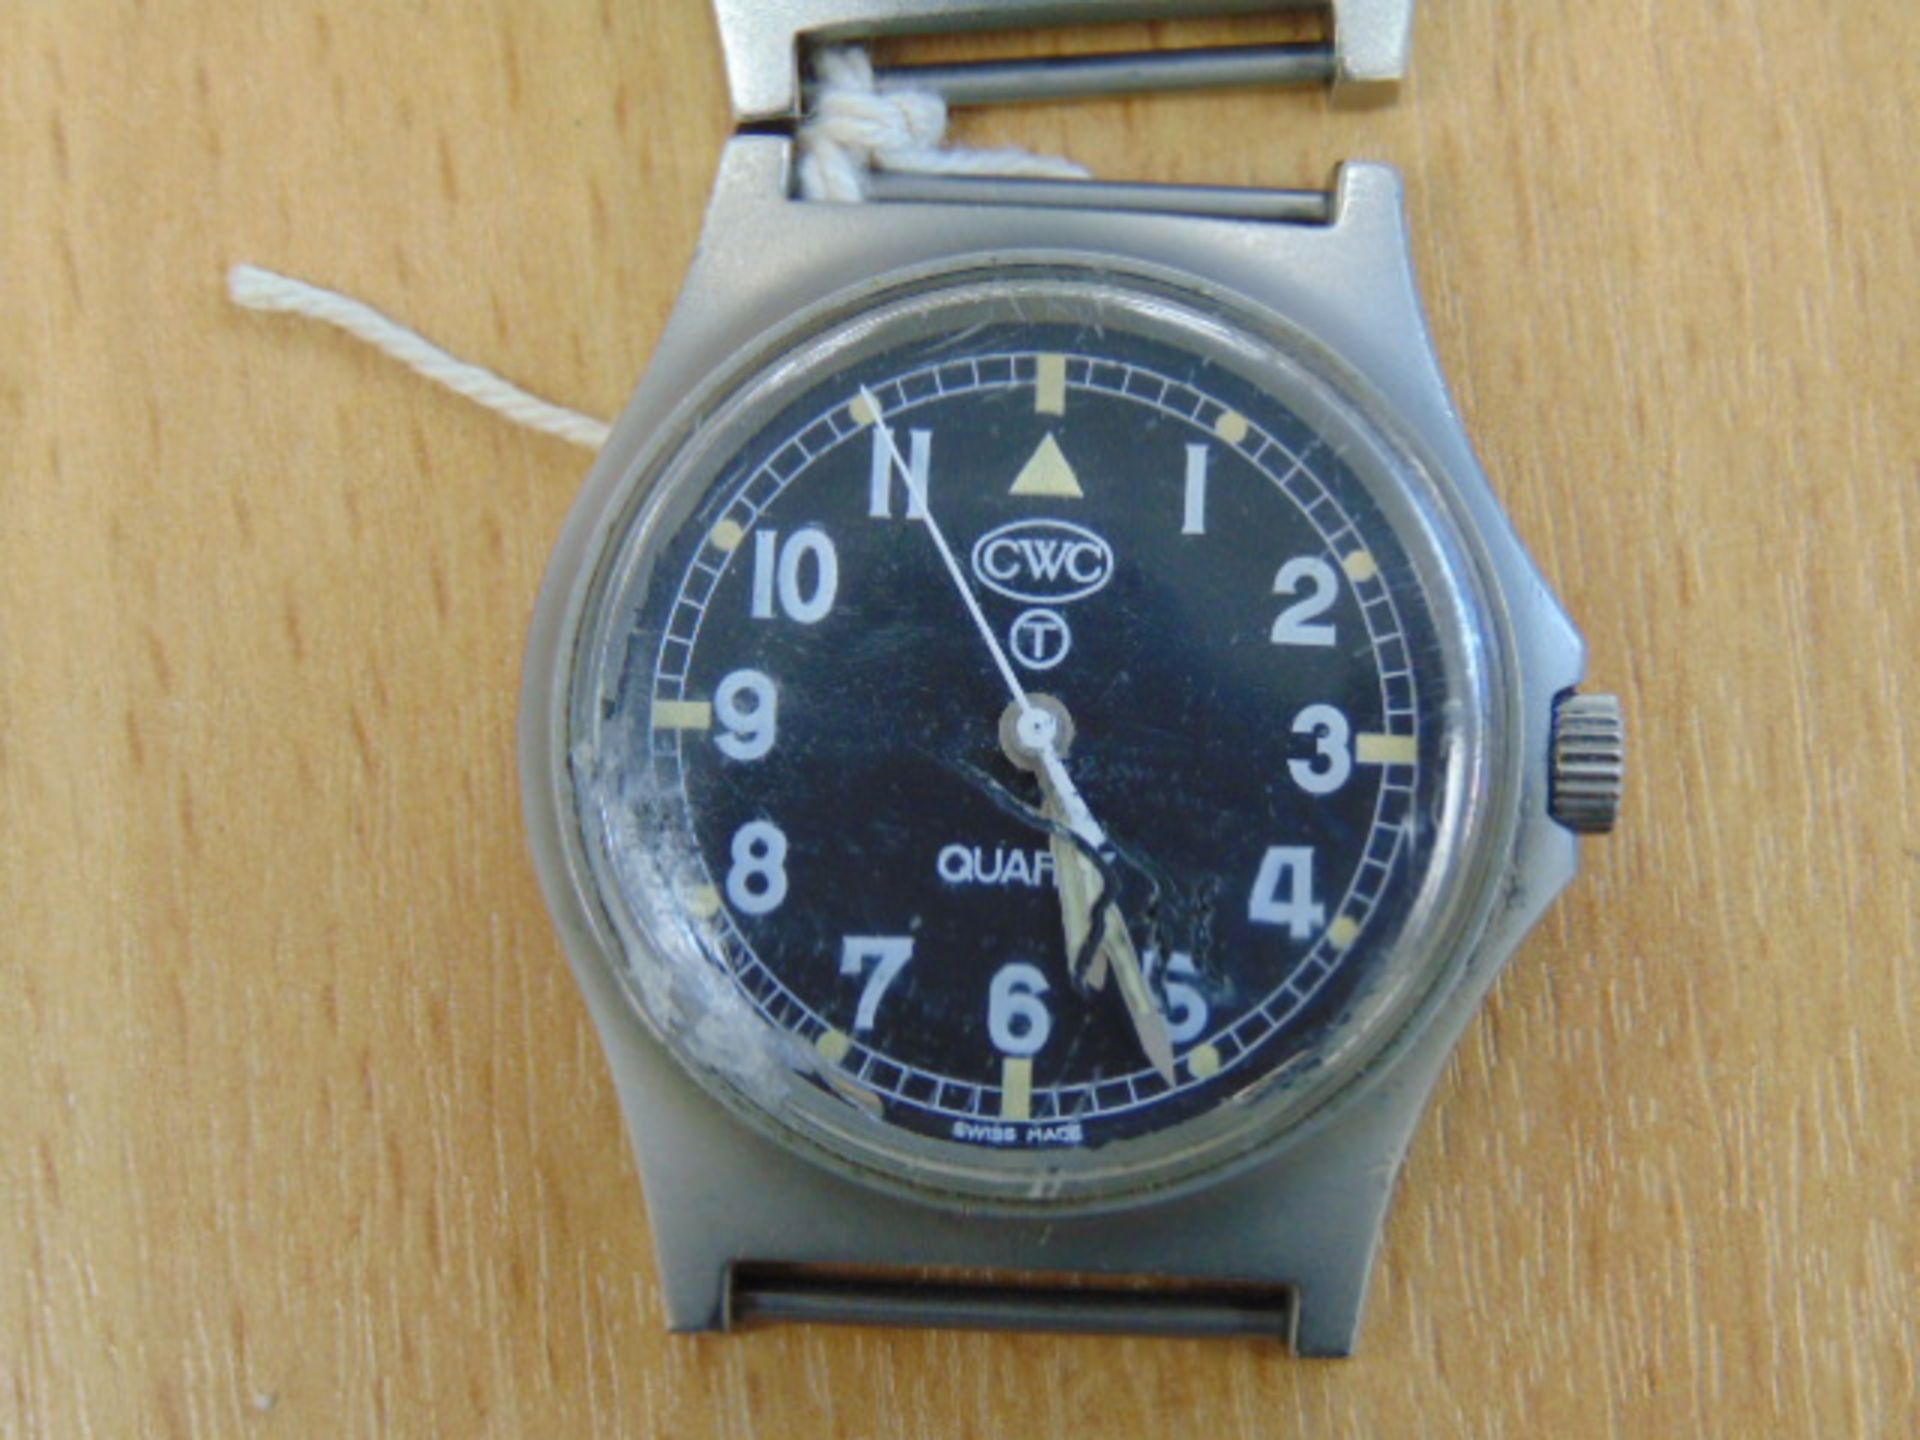 2X CWC SERVICE WATCHES DATED 1998/1990 - Image 5 of 9